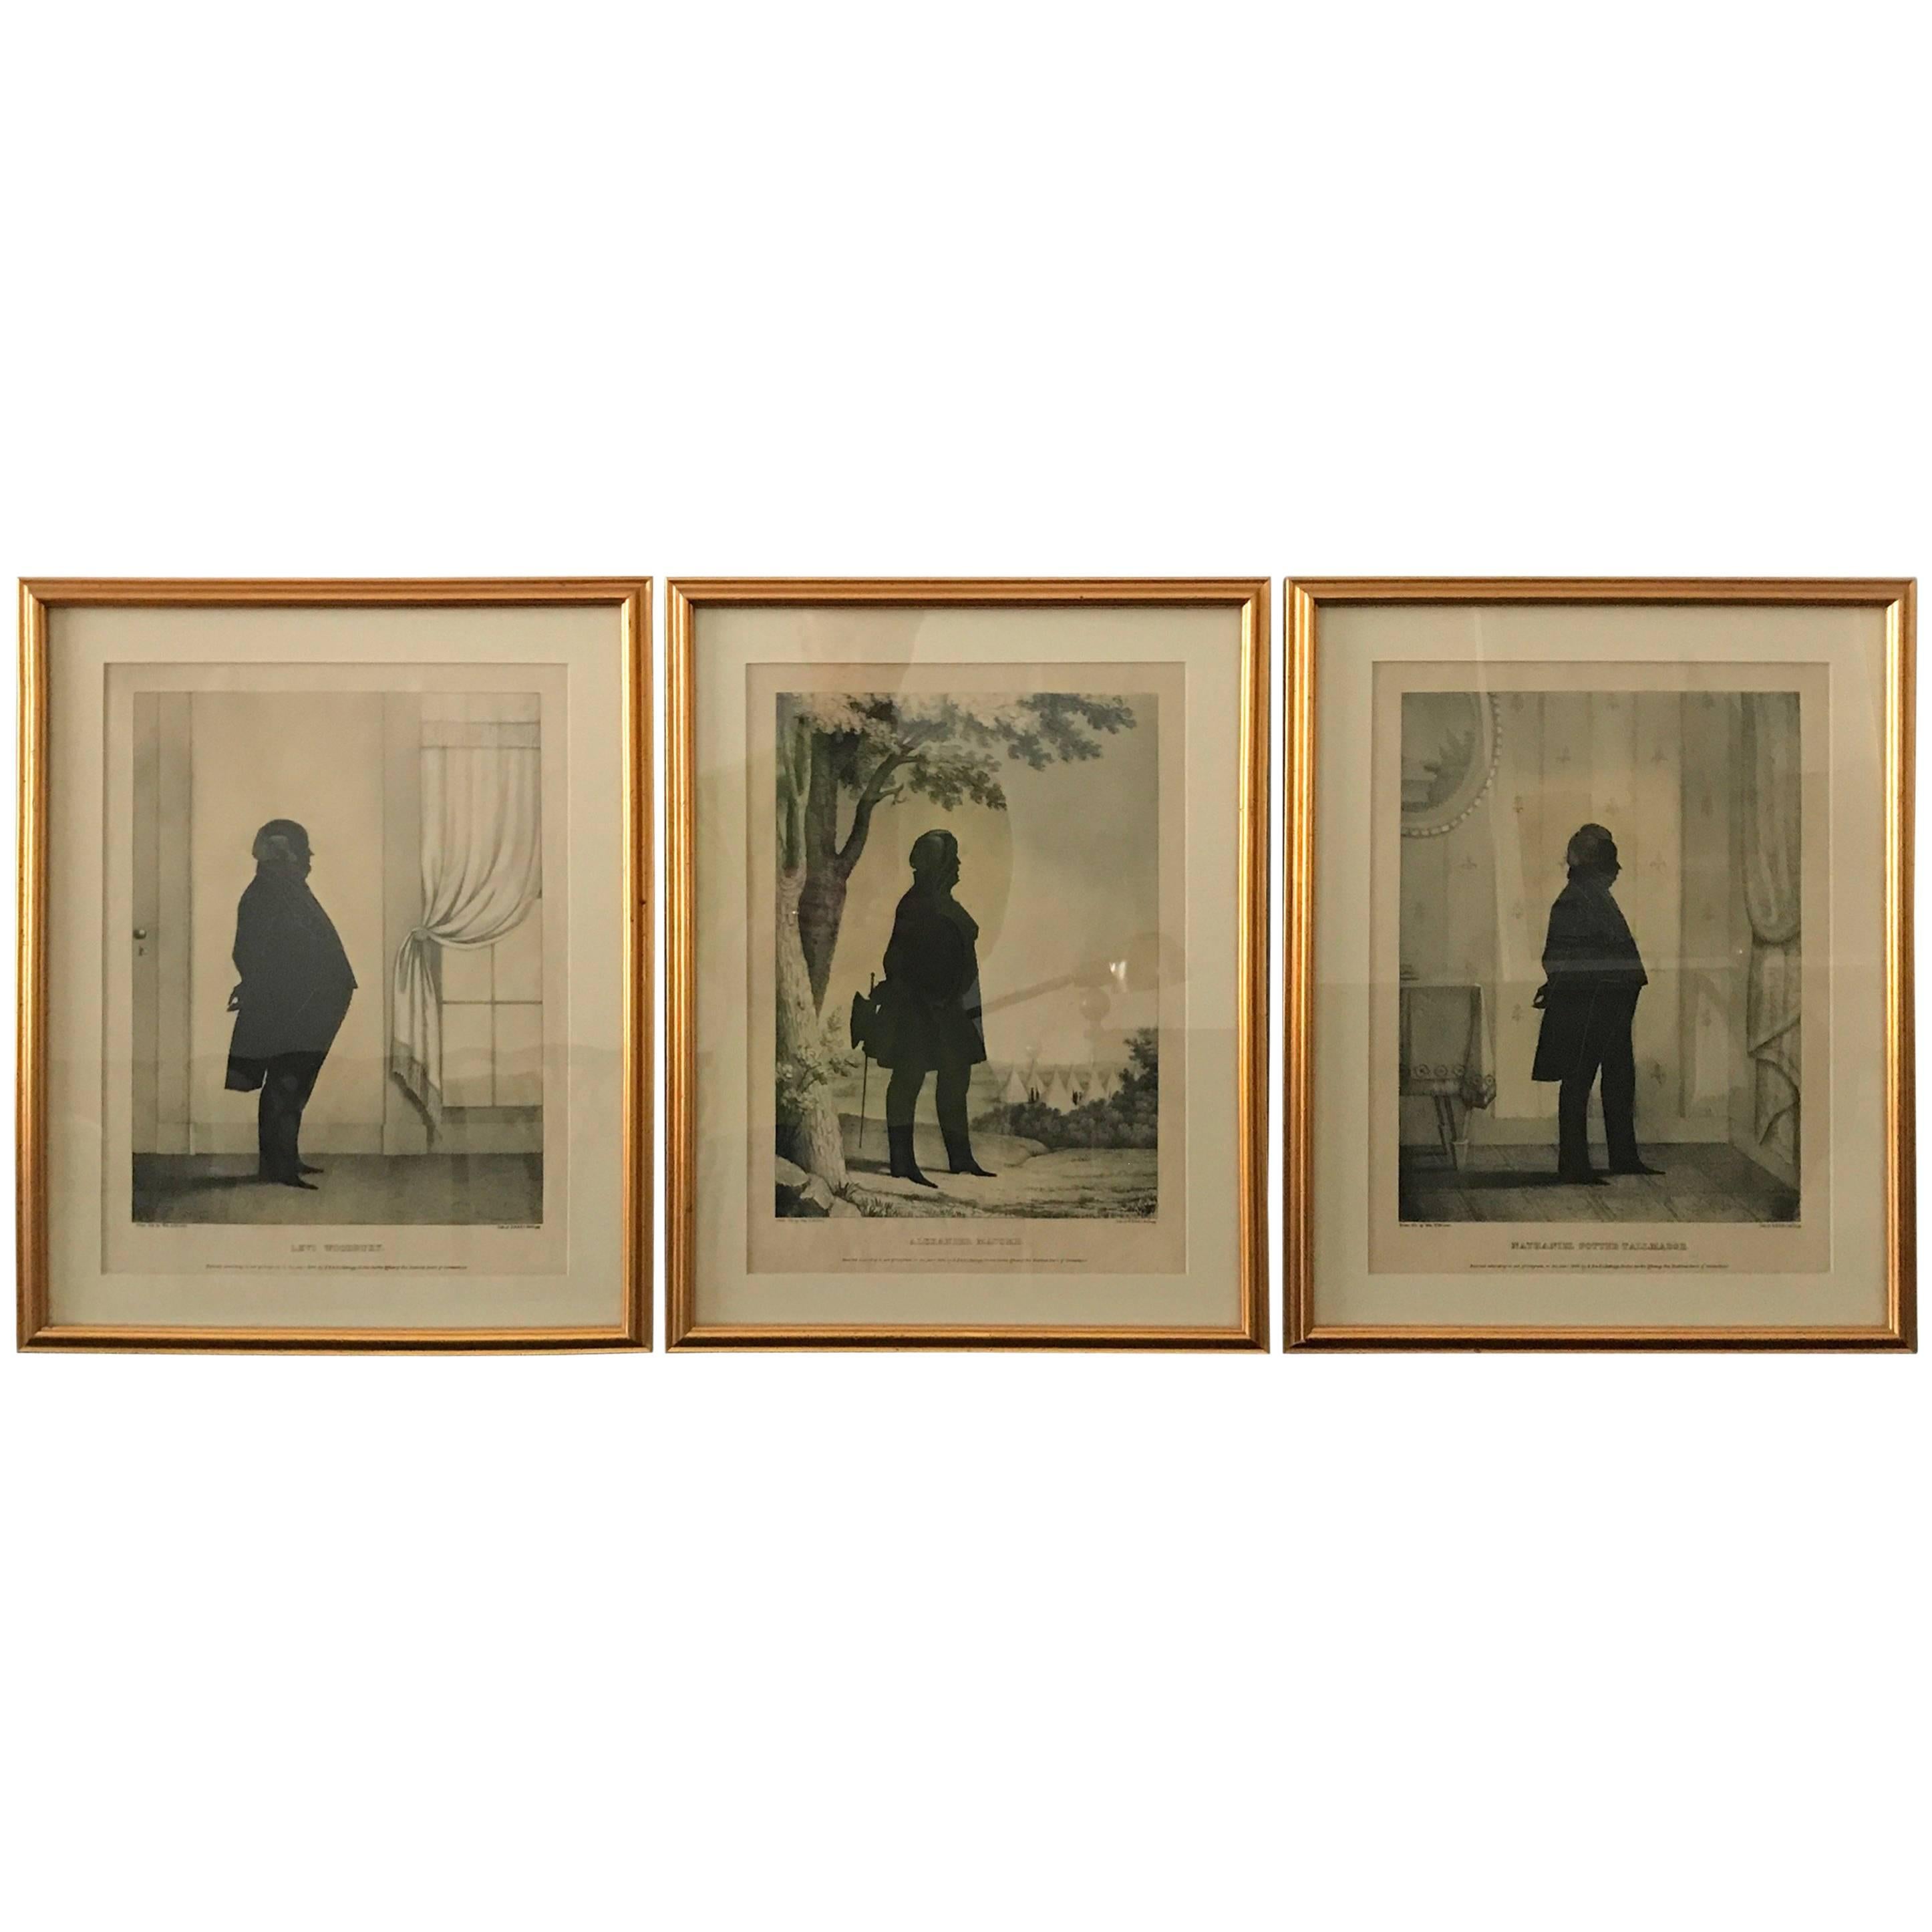  Three 19th Century Silhouette Lithographs of Gentlemen  For Sale